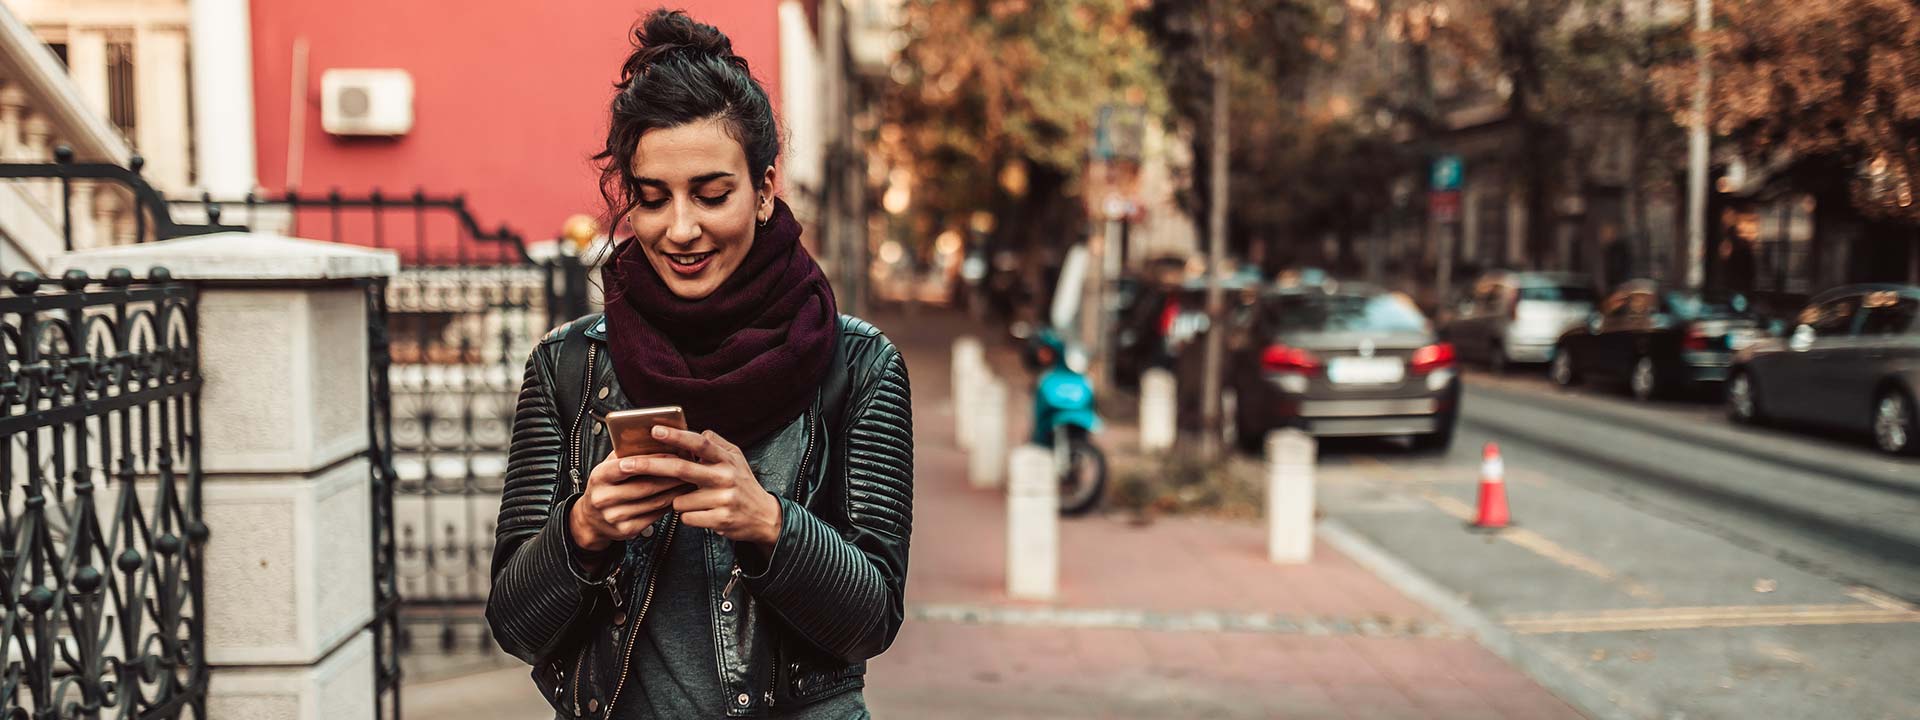 A young woman is walking down a street, looking down at her phone and smiling.